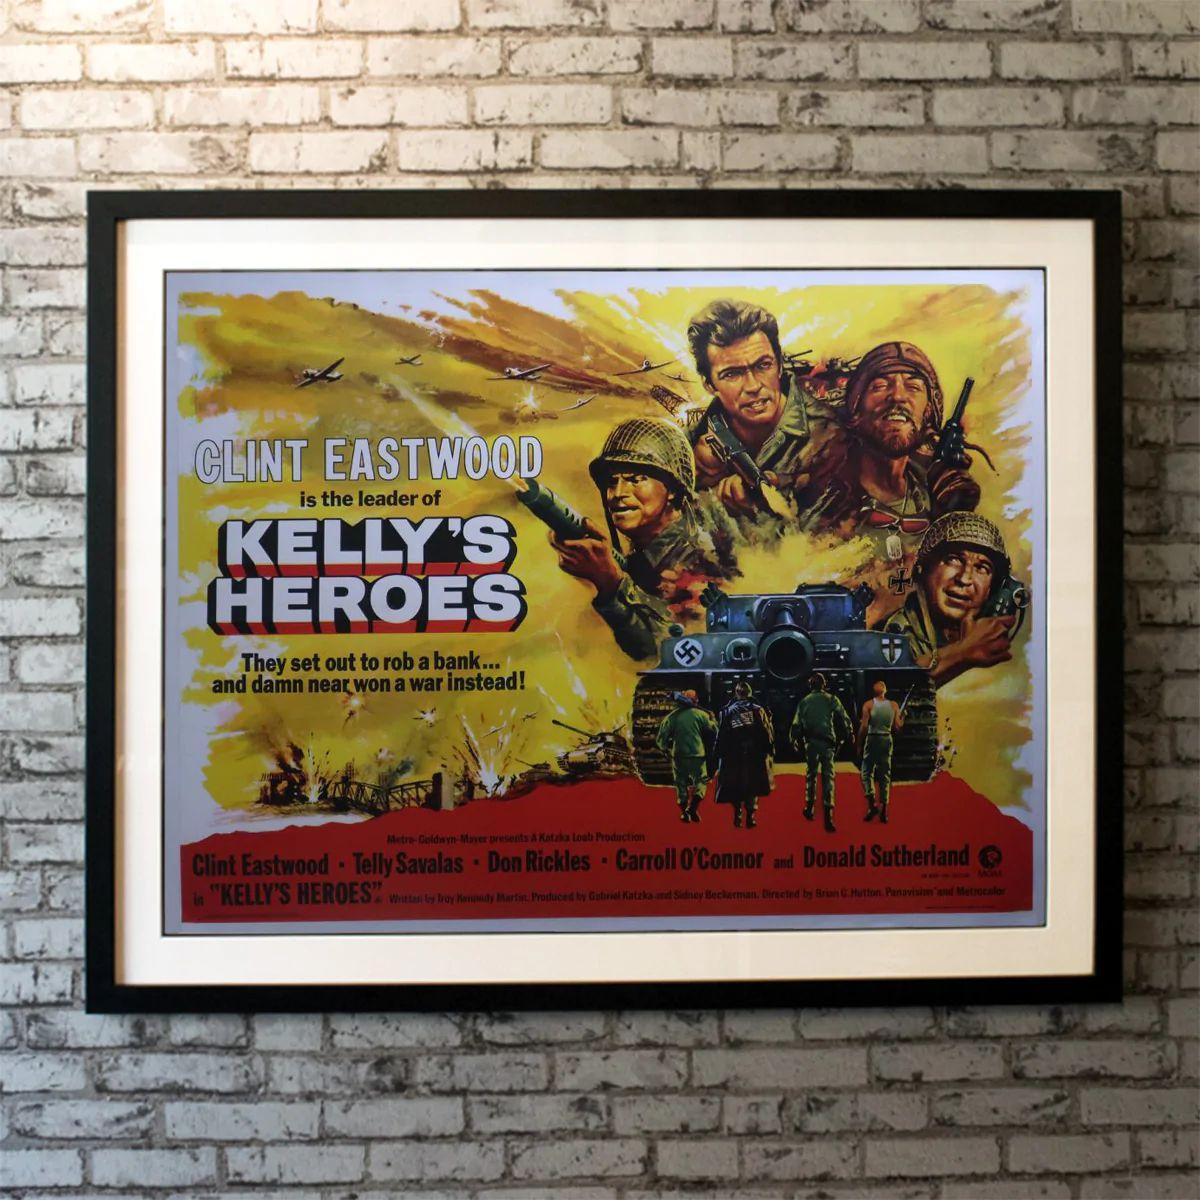 Kelly's Heroes, Unframed Poster, 1970

A group of U.S. soldiers sneaks across enemy lines to get their hands on a secret stash of Nazi treasure.

Year: 1970
Nationality: United Kingdom
Condition: Linen-backed
Type: Original British